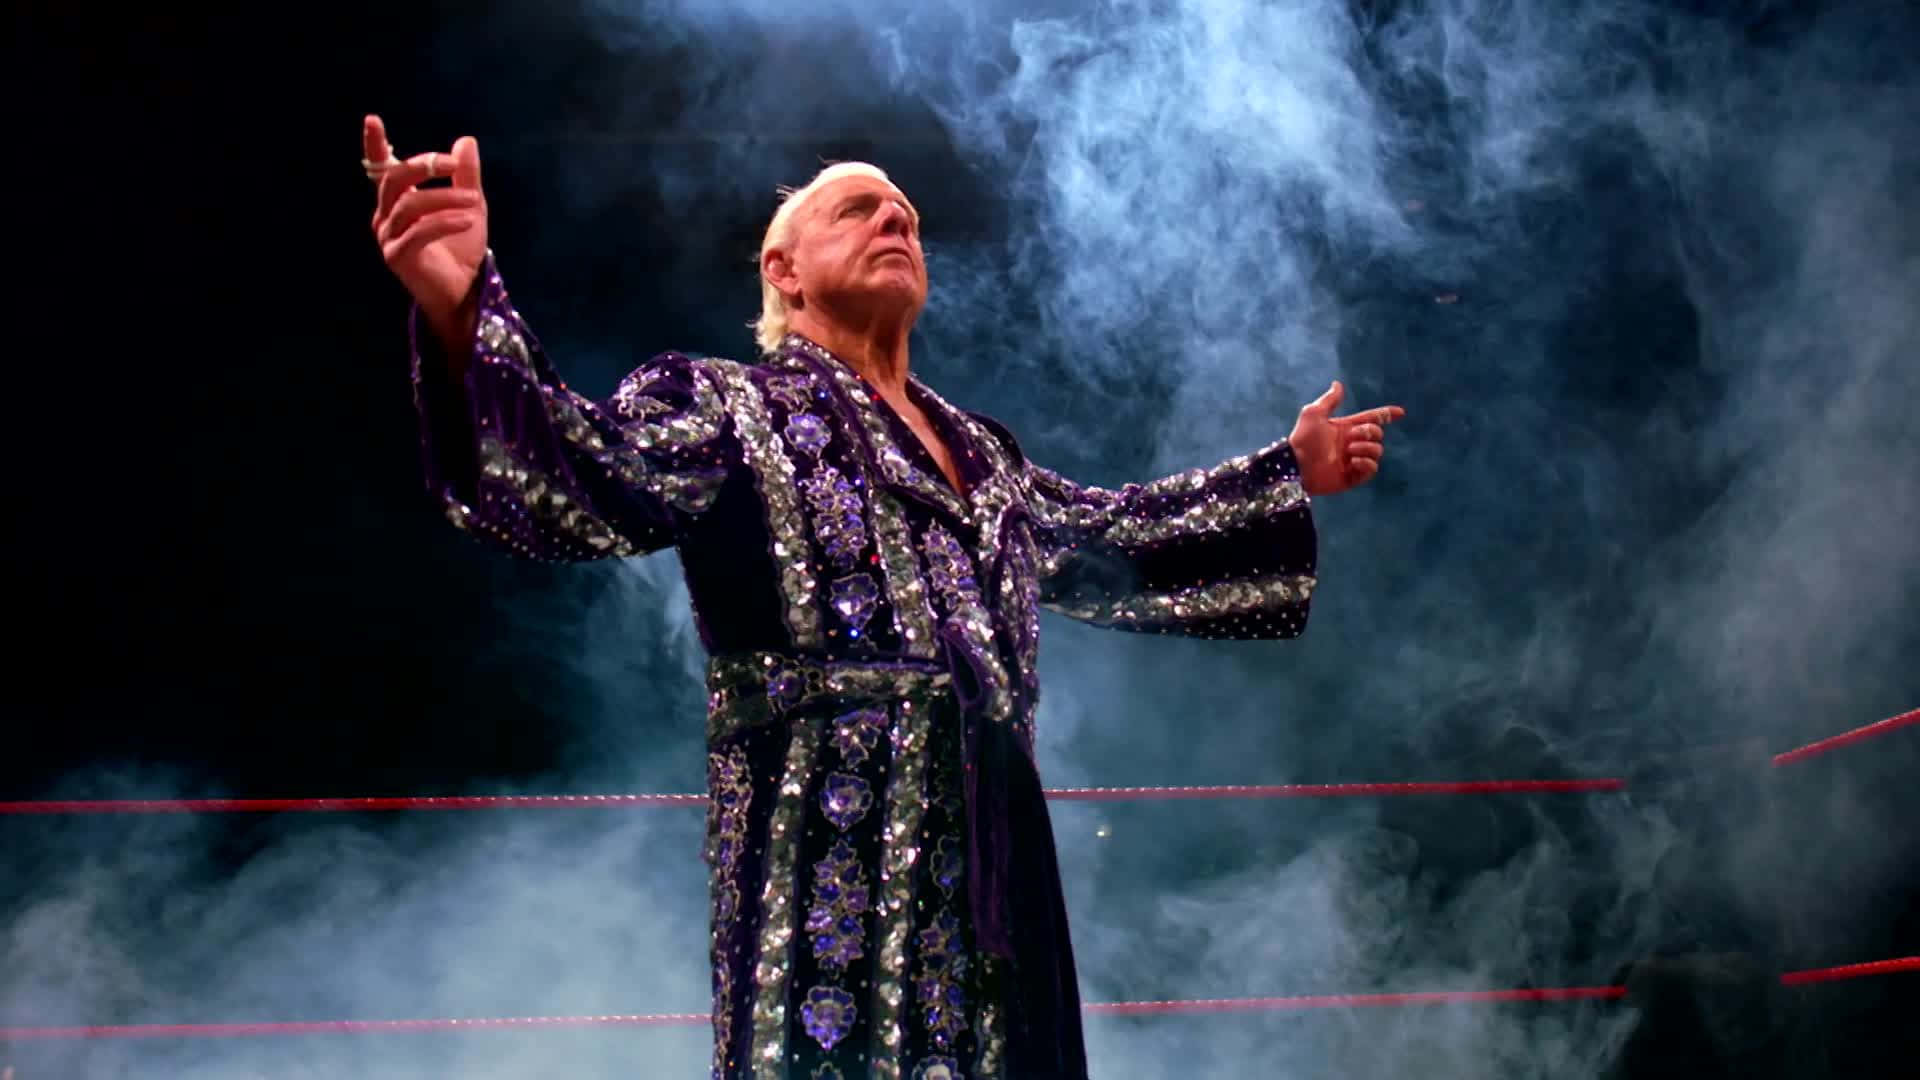 Iconic Wrestler Ric Flair In Espn's 30 For 30 Series Background